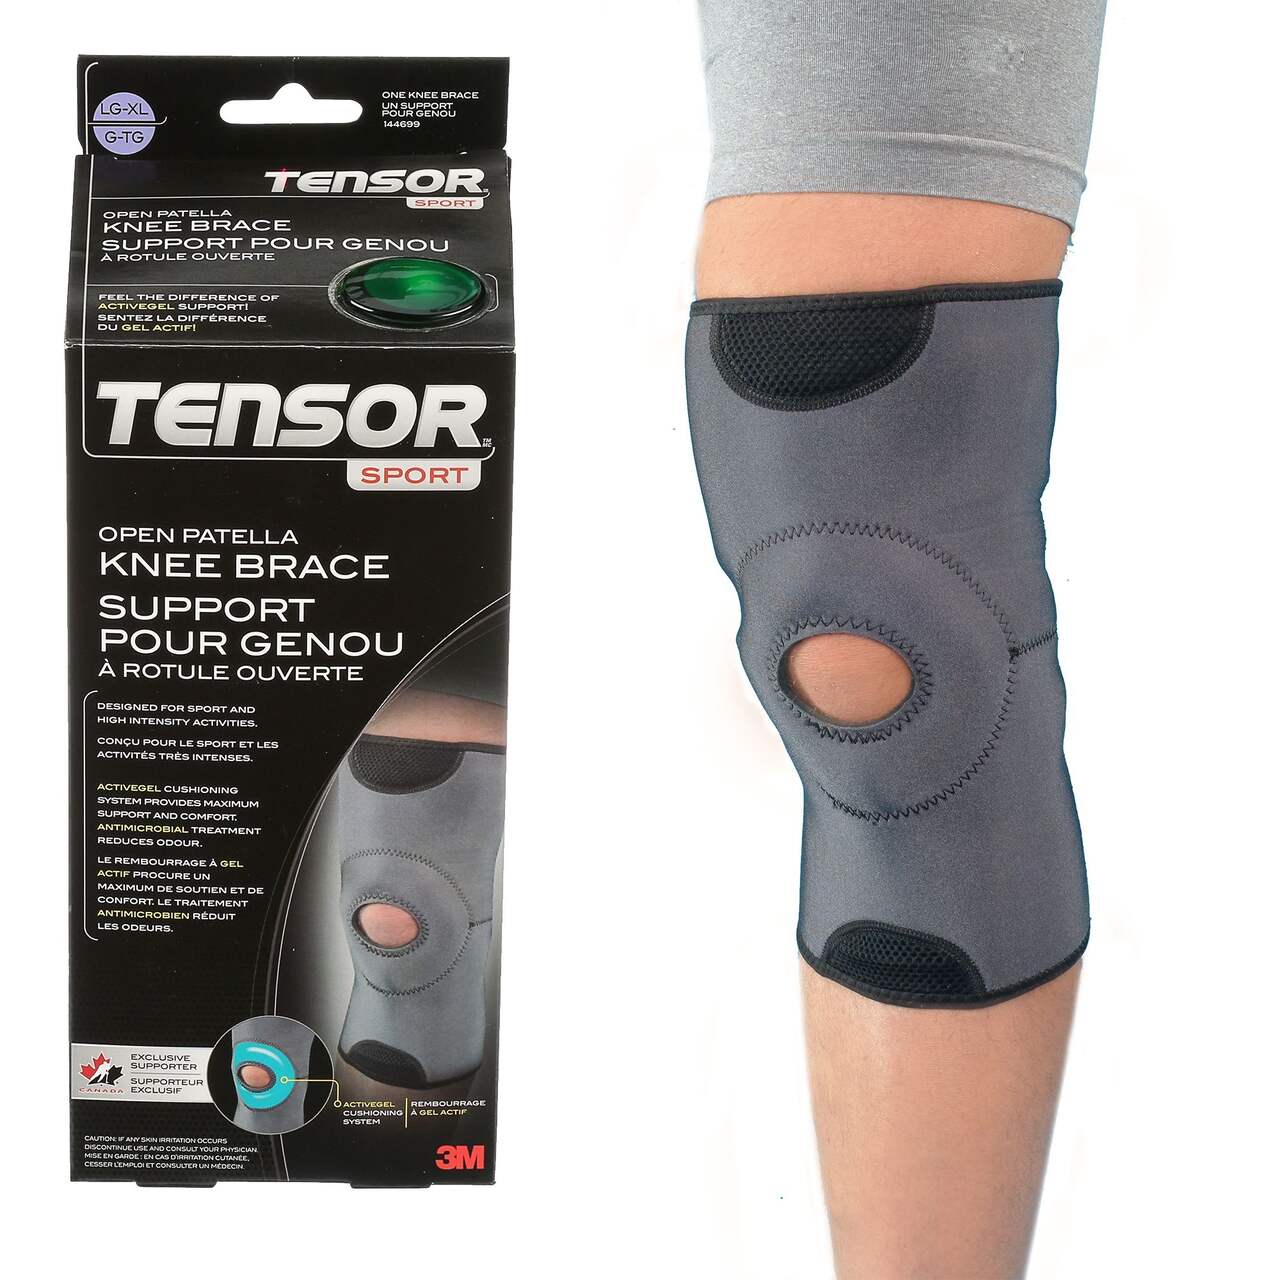 TopCare Health Knee Support, Moderate, Open Patella, One Size